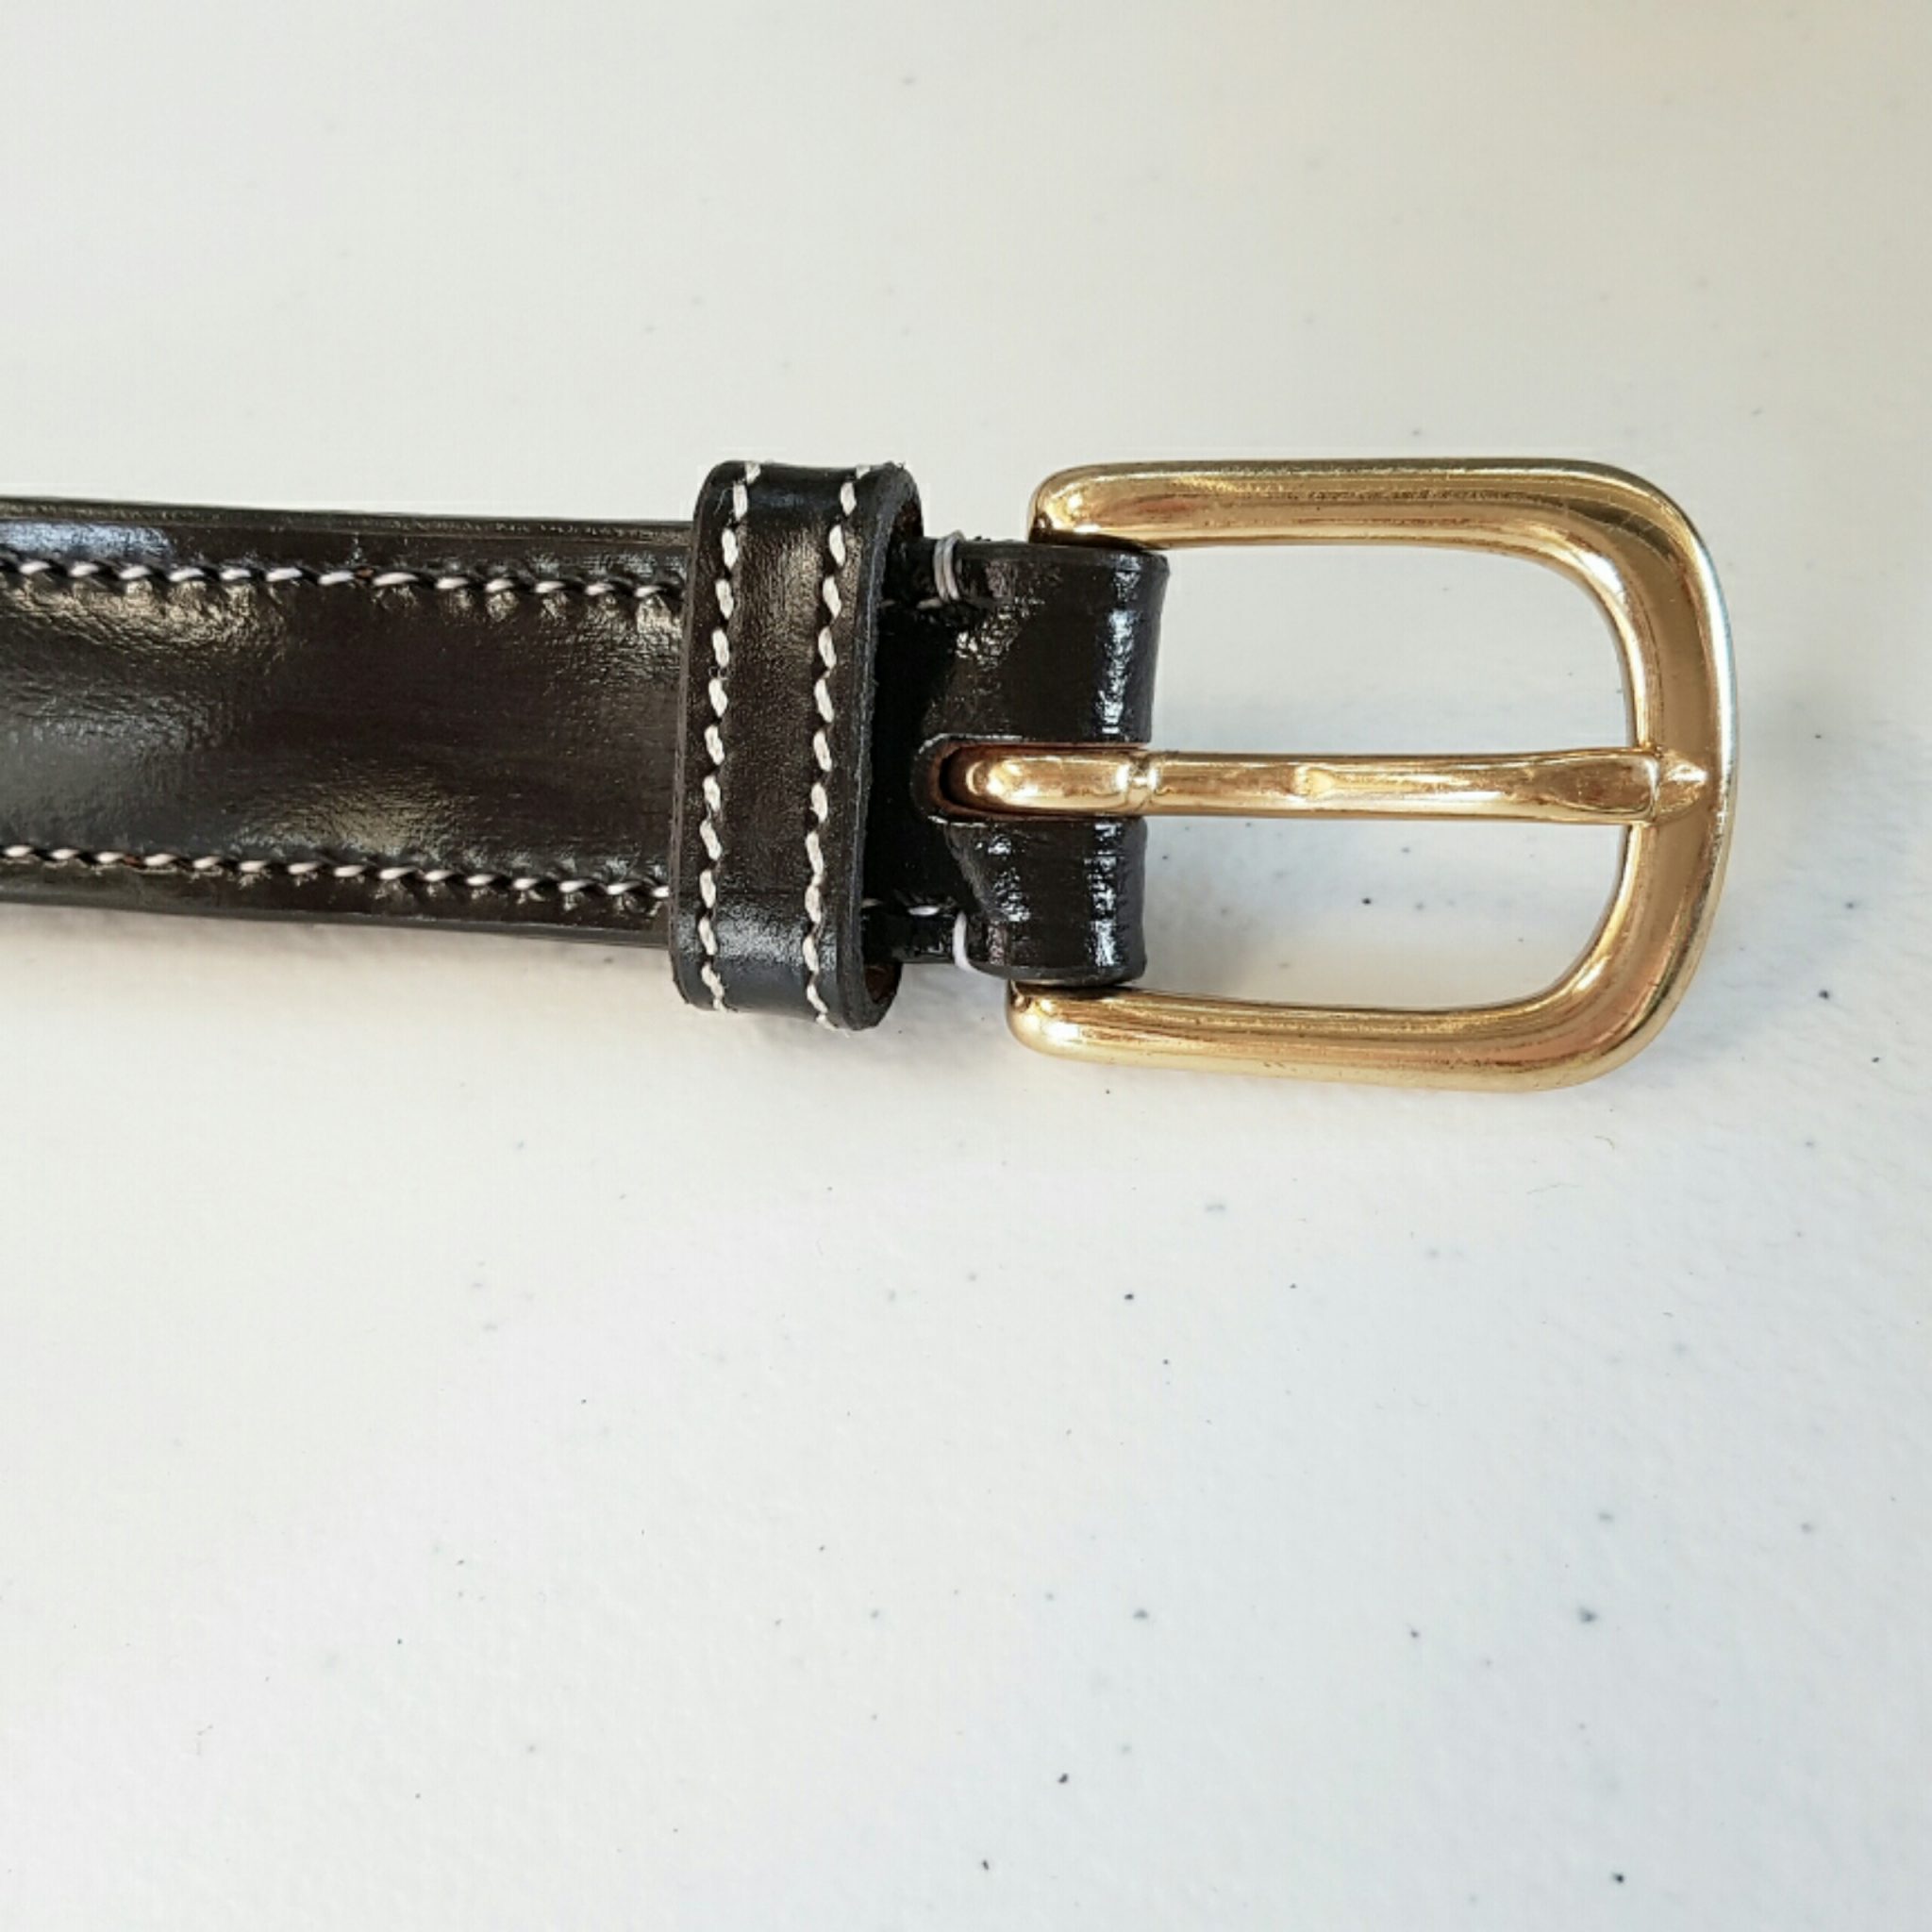 Elastic & Leather Belt with Gold Buckle